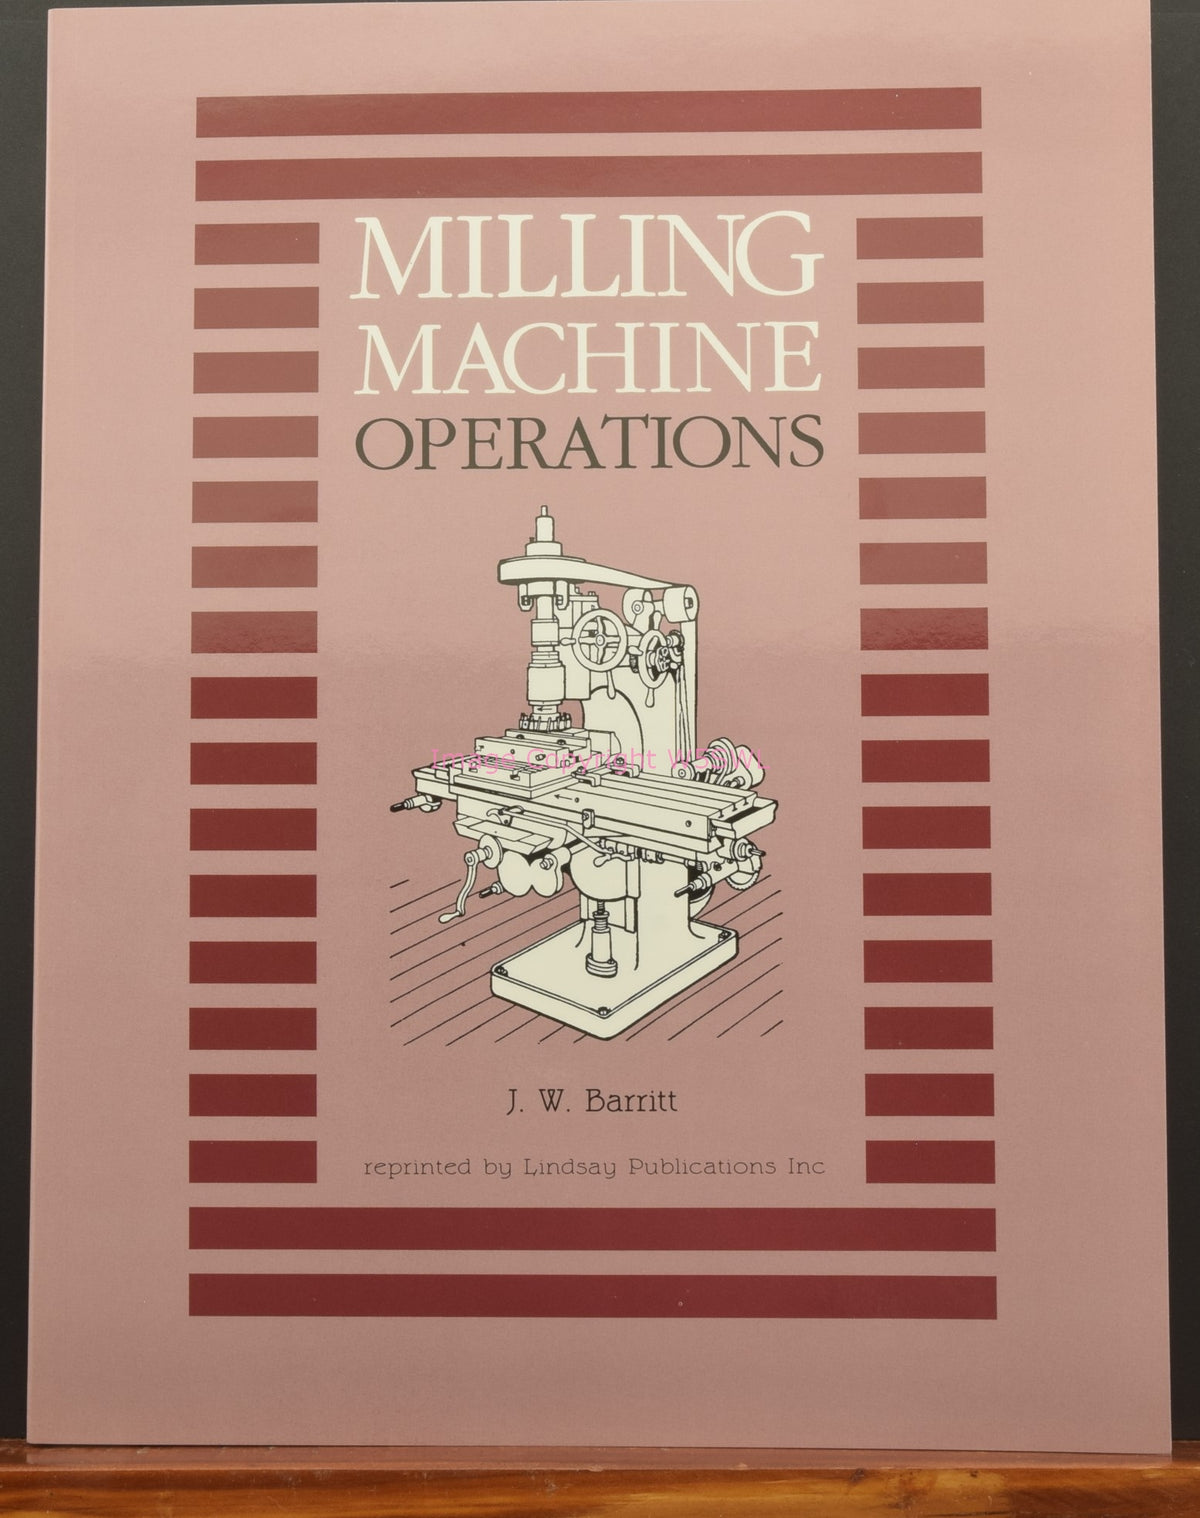 MILLING MACHINE OPERATIONS By J W Barritt - Dave's Hobby Shop by W5SWL